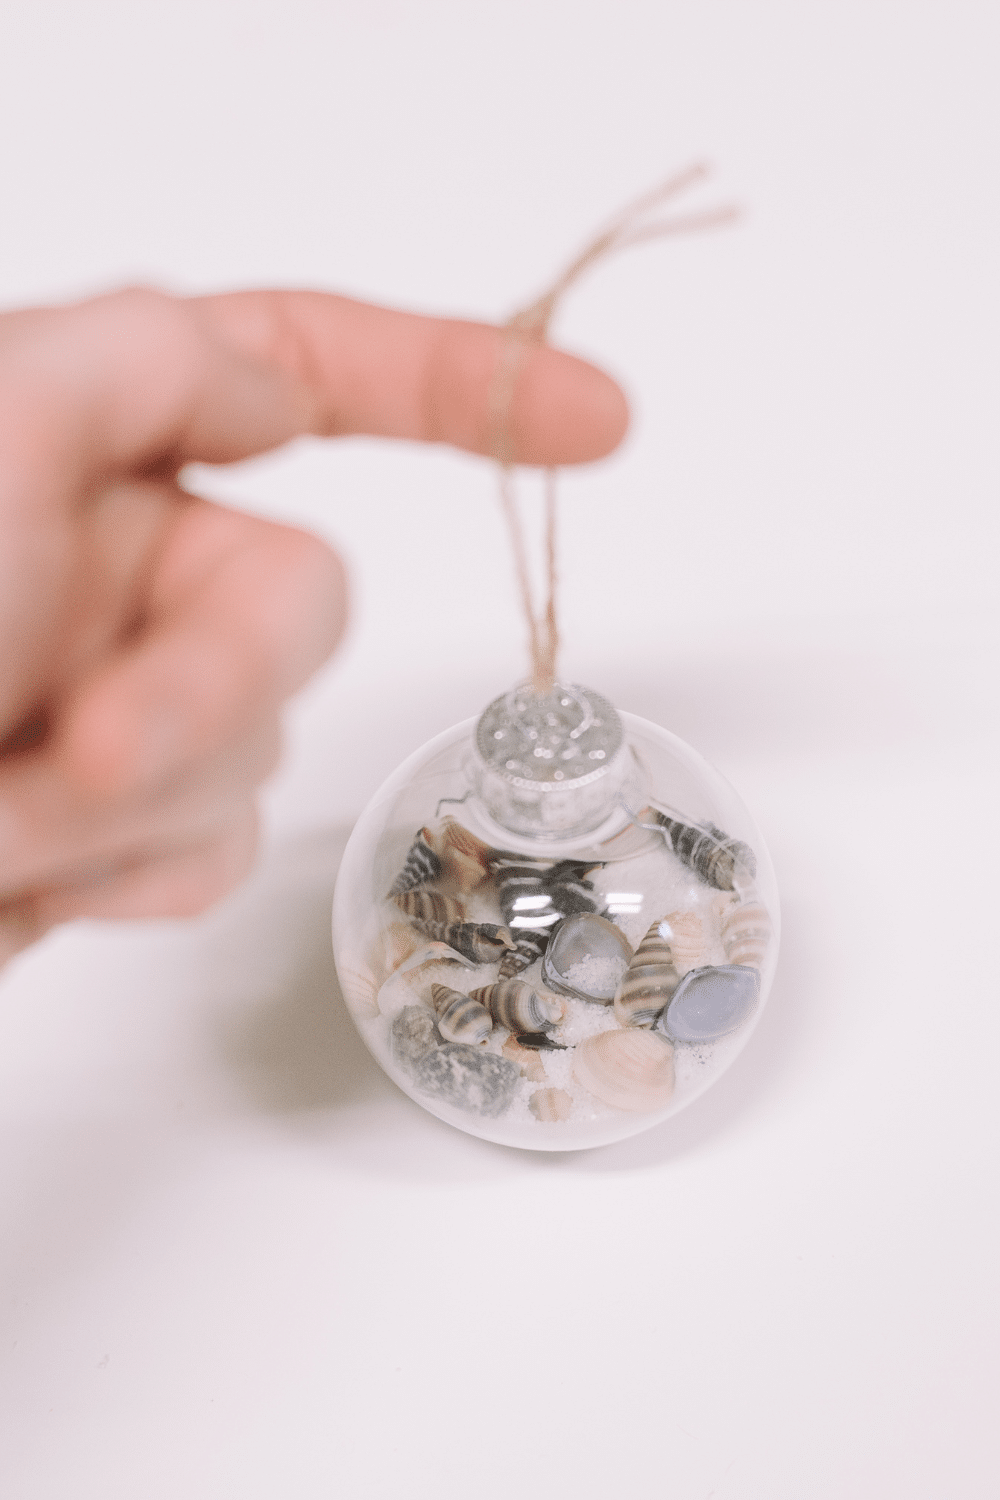 How to Make an Ocean Christmas Ornament